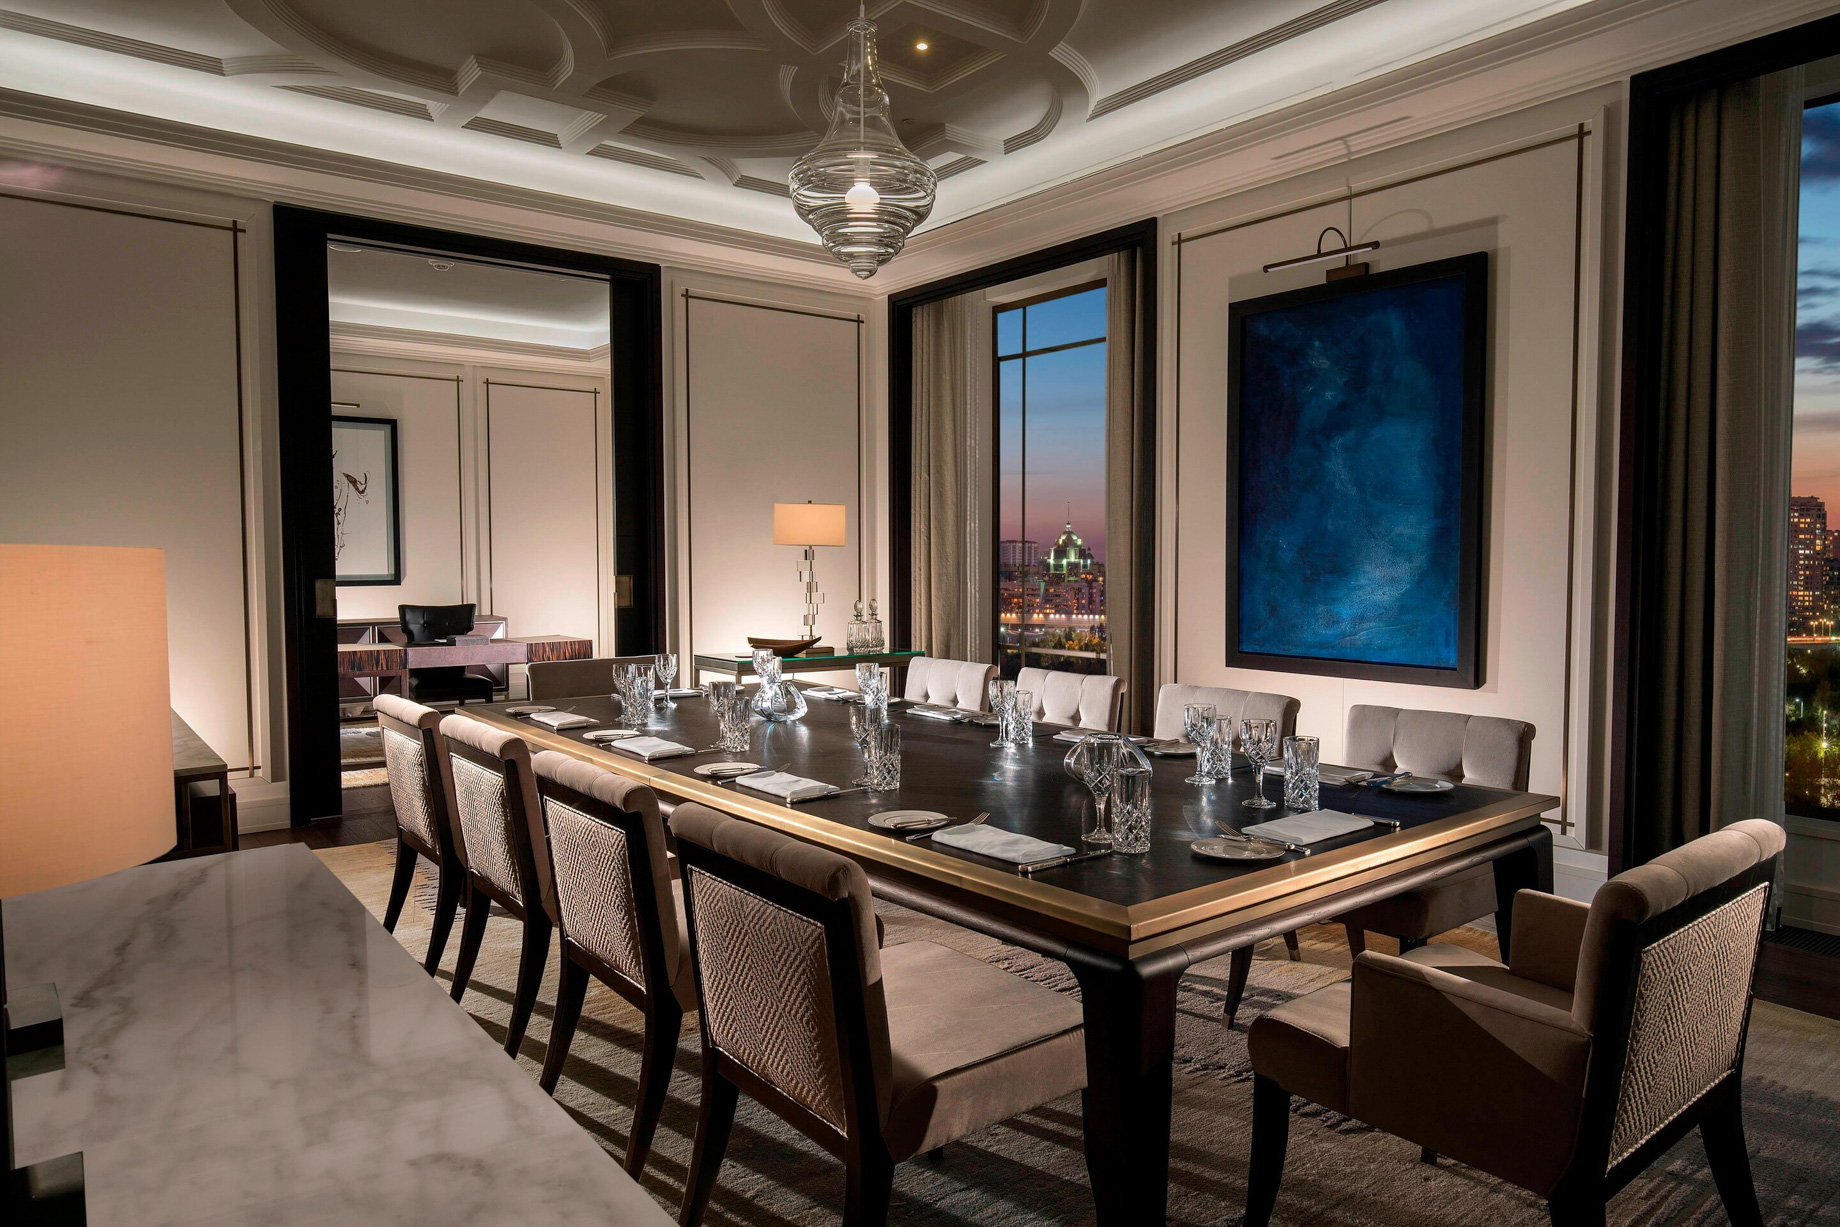 The St. Regis Astana Hotel – Astana, Kazakhstan – Presidential Suite Dining Room and Study